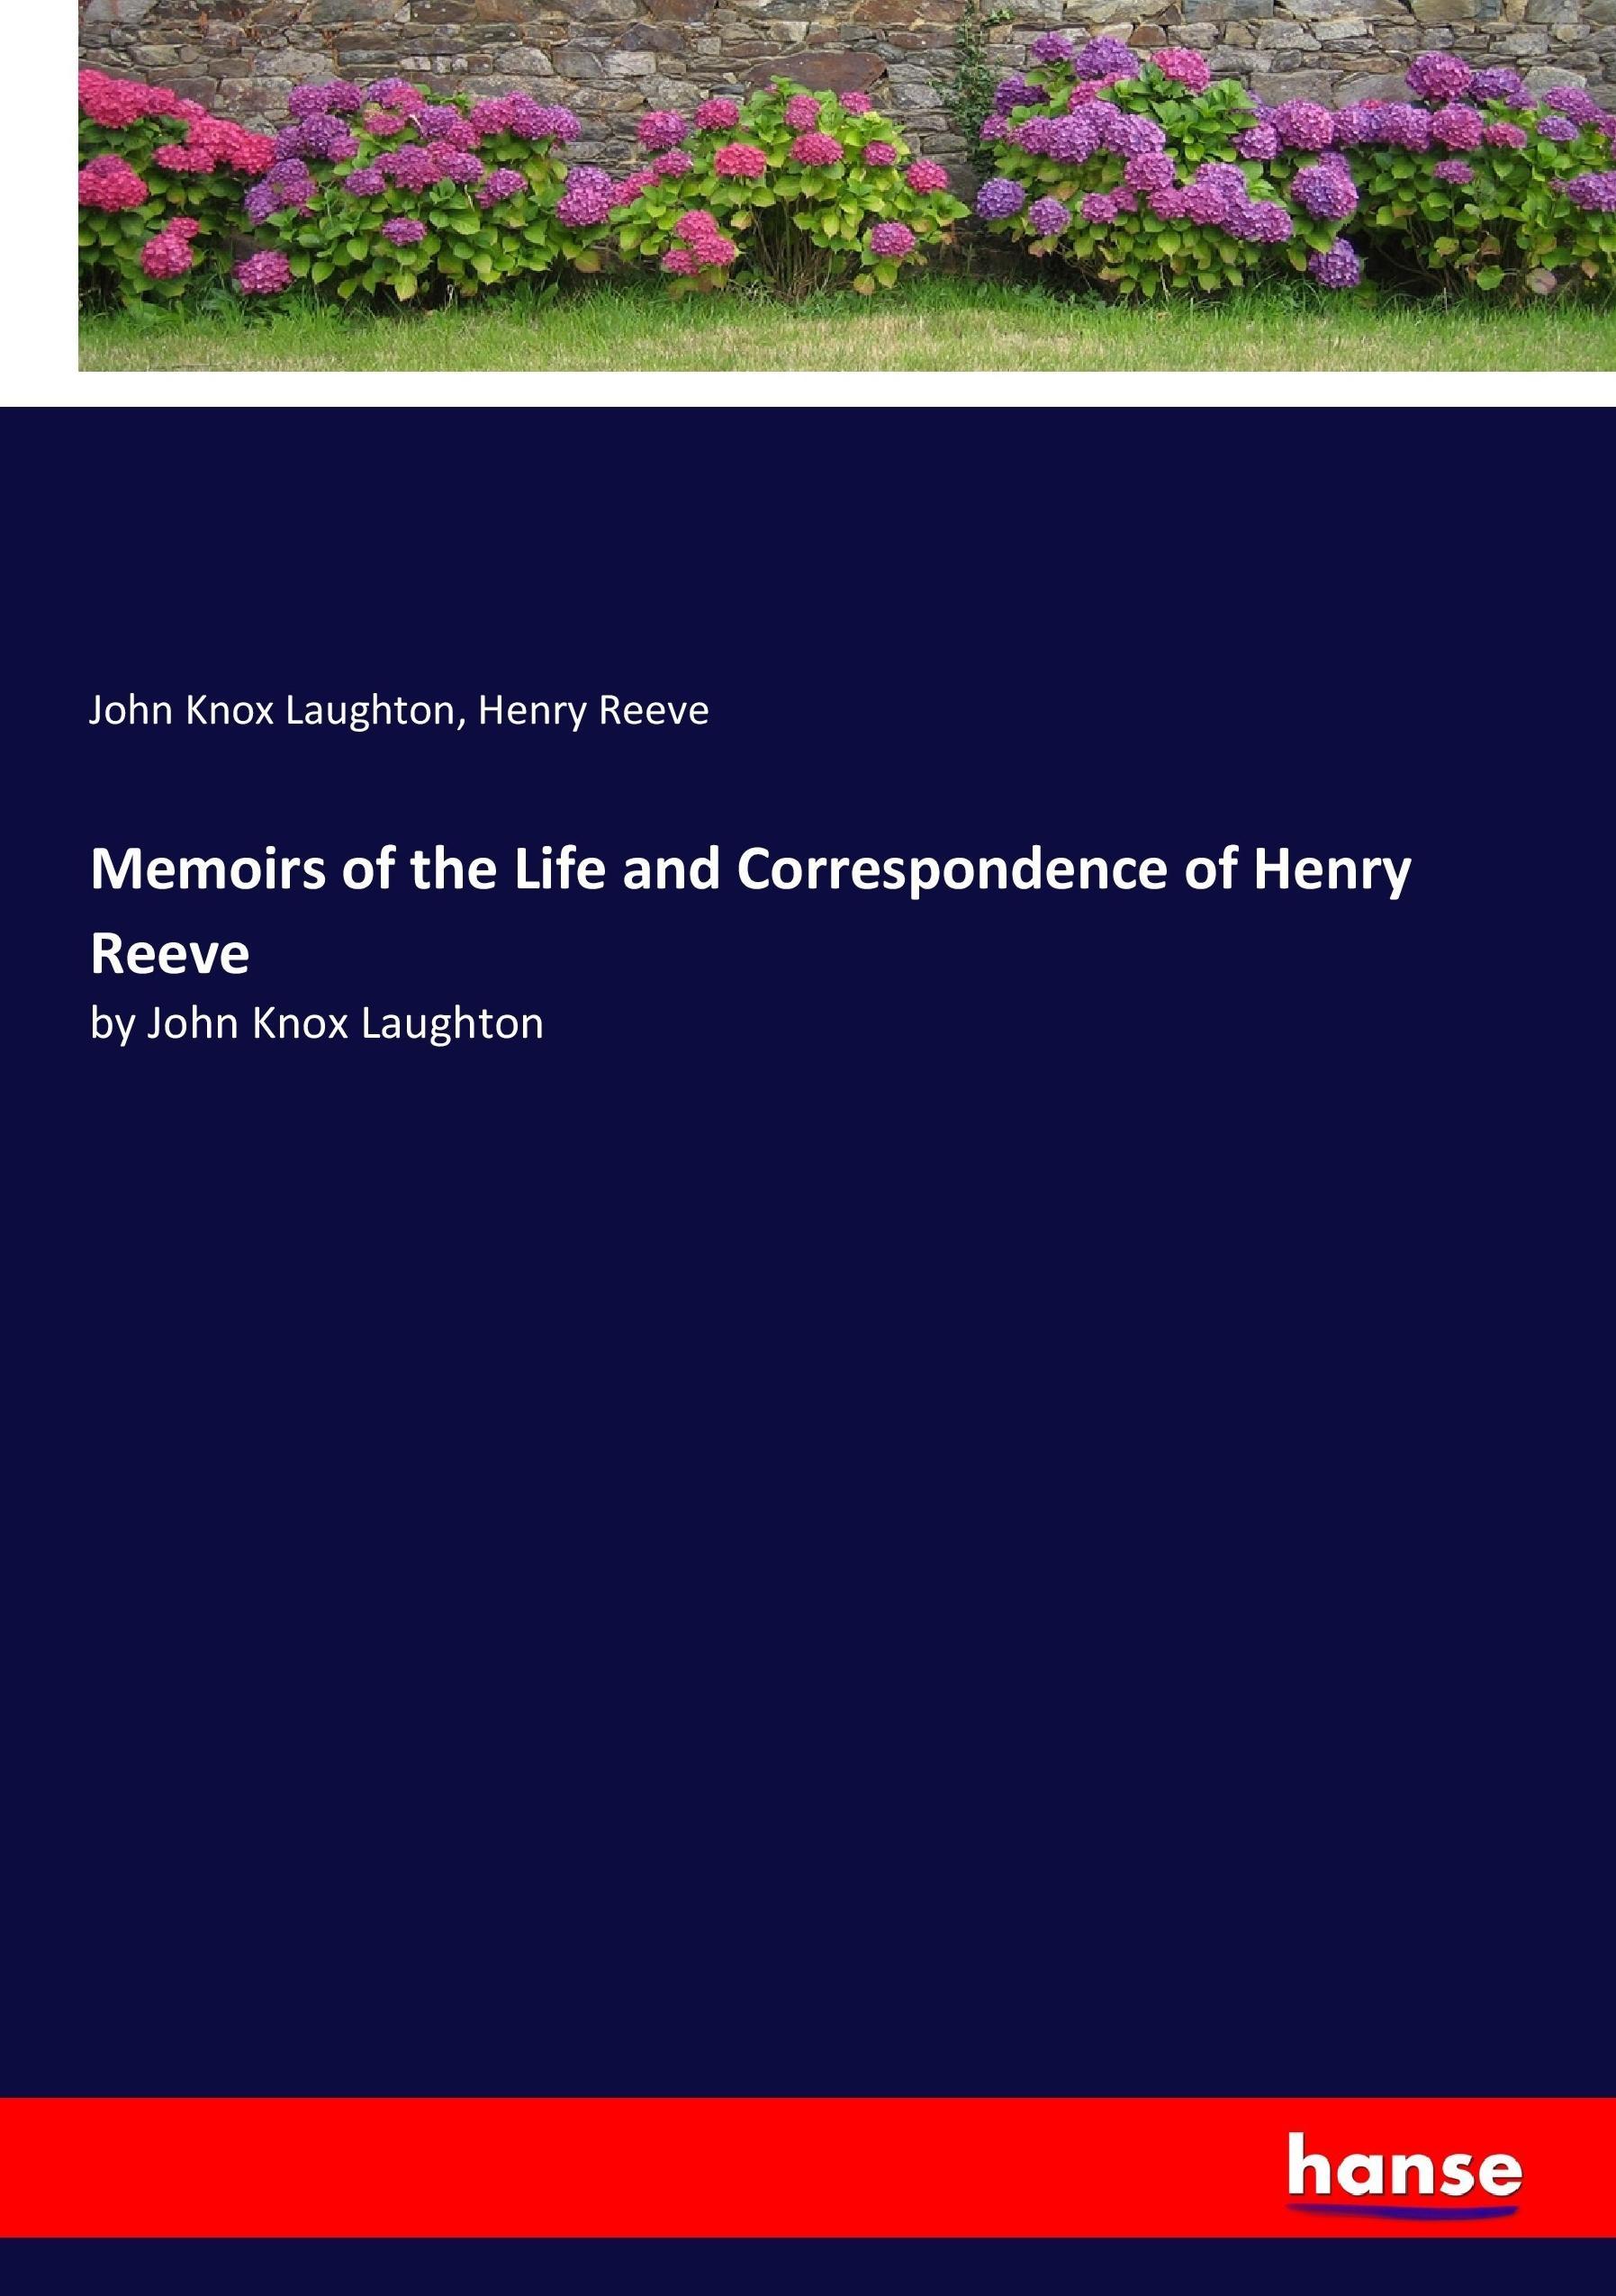 Memoirs of the Life and Correspondence of Henry Reeve | by John Knox Laughton | John Knox Laughton (u. a.) | Taschenbuch | Paperback | 456 S. | Englisch | 2017 | hansebooks | EAN 9783337094744 - Laughton, John Knox